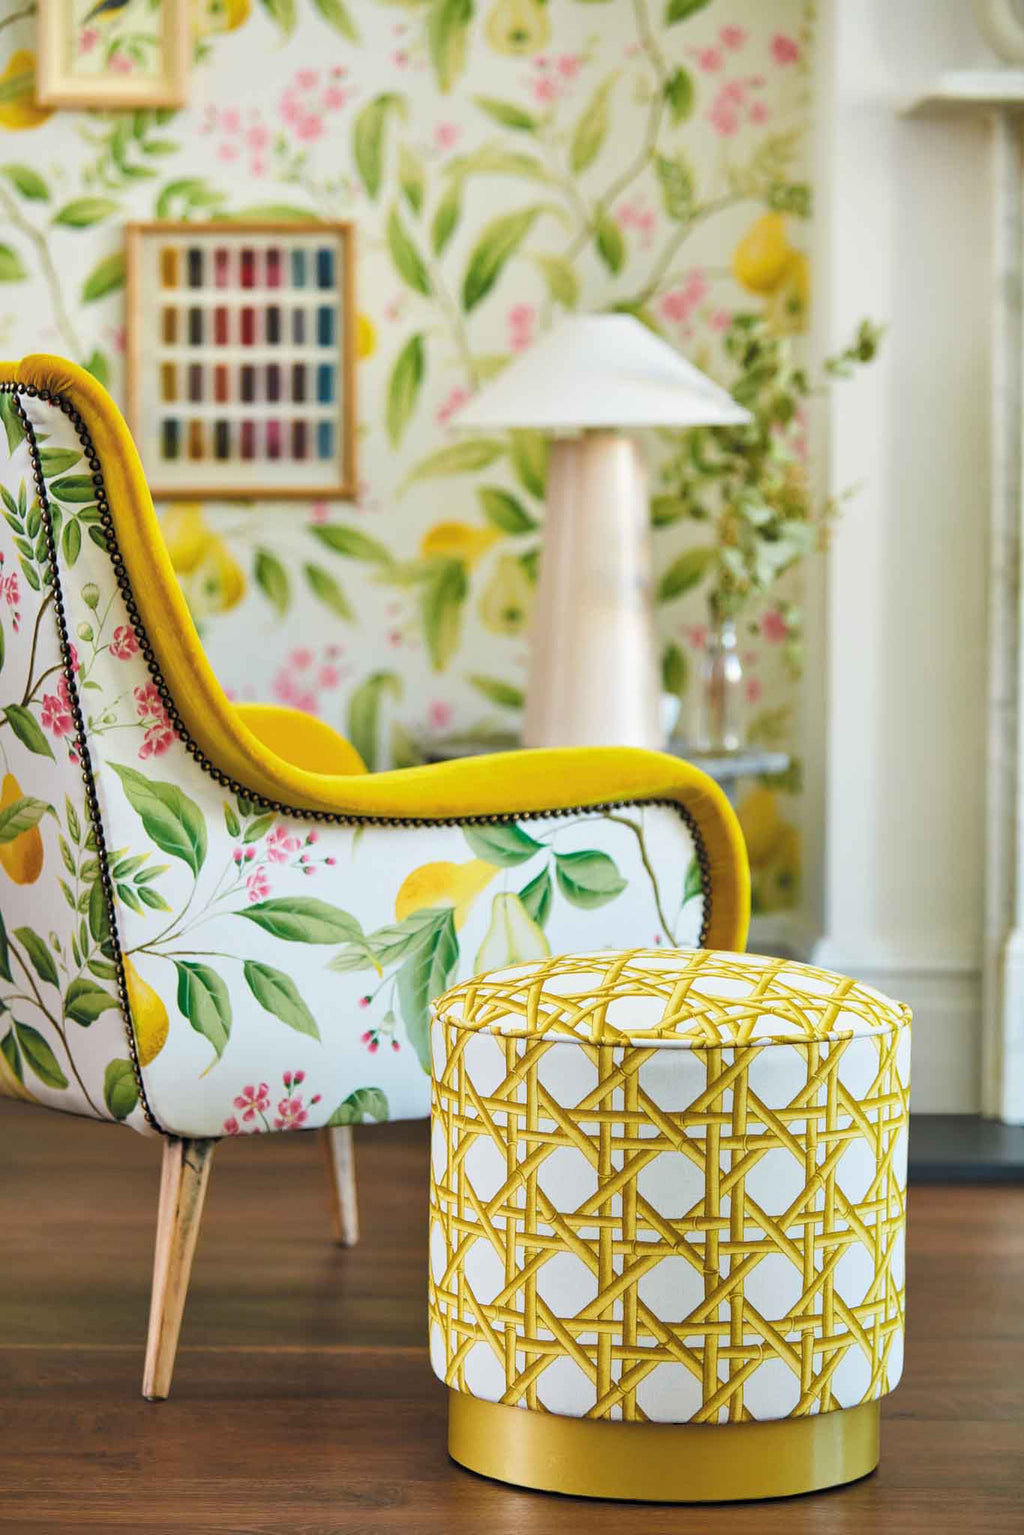 Marie fabric yellow pears painted in chinoiserie style with wallpaper to match